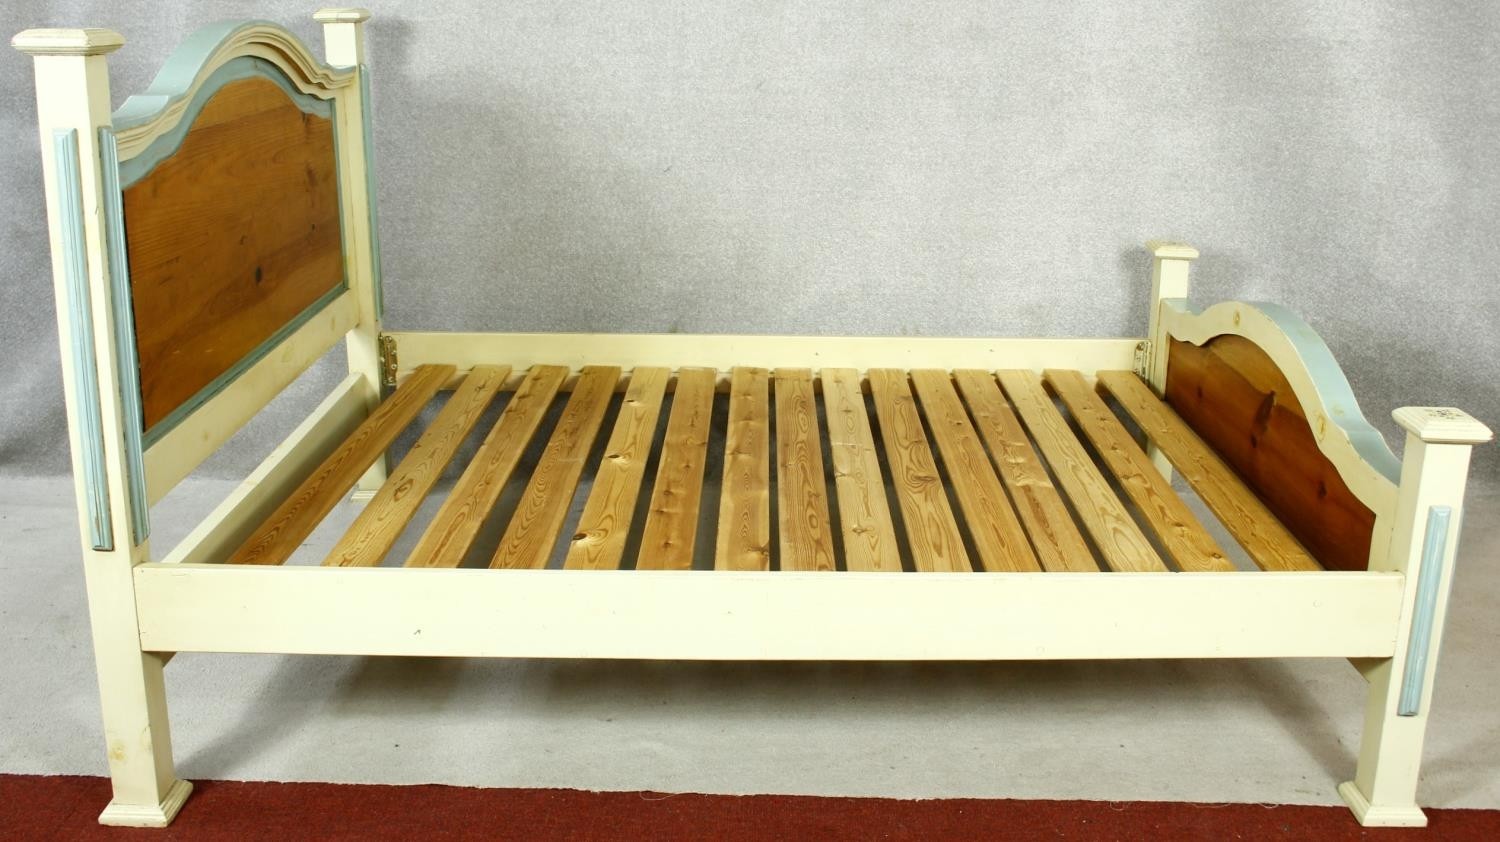 A contemporary painted pine bedstead for a 5ft mattress. - Image 4 of 4